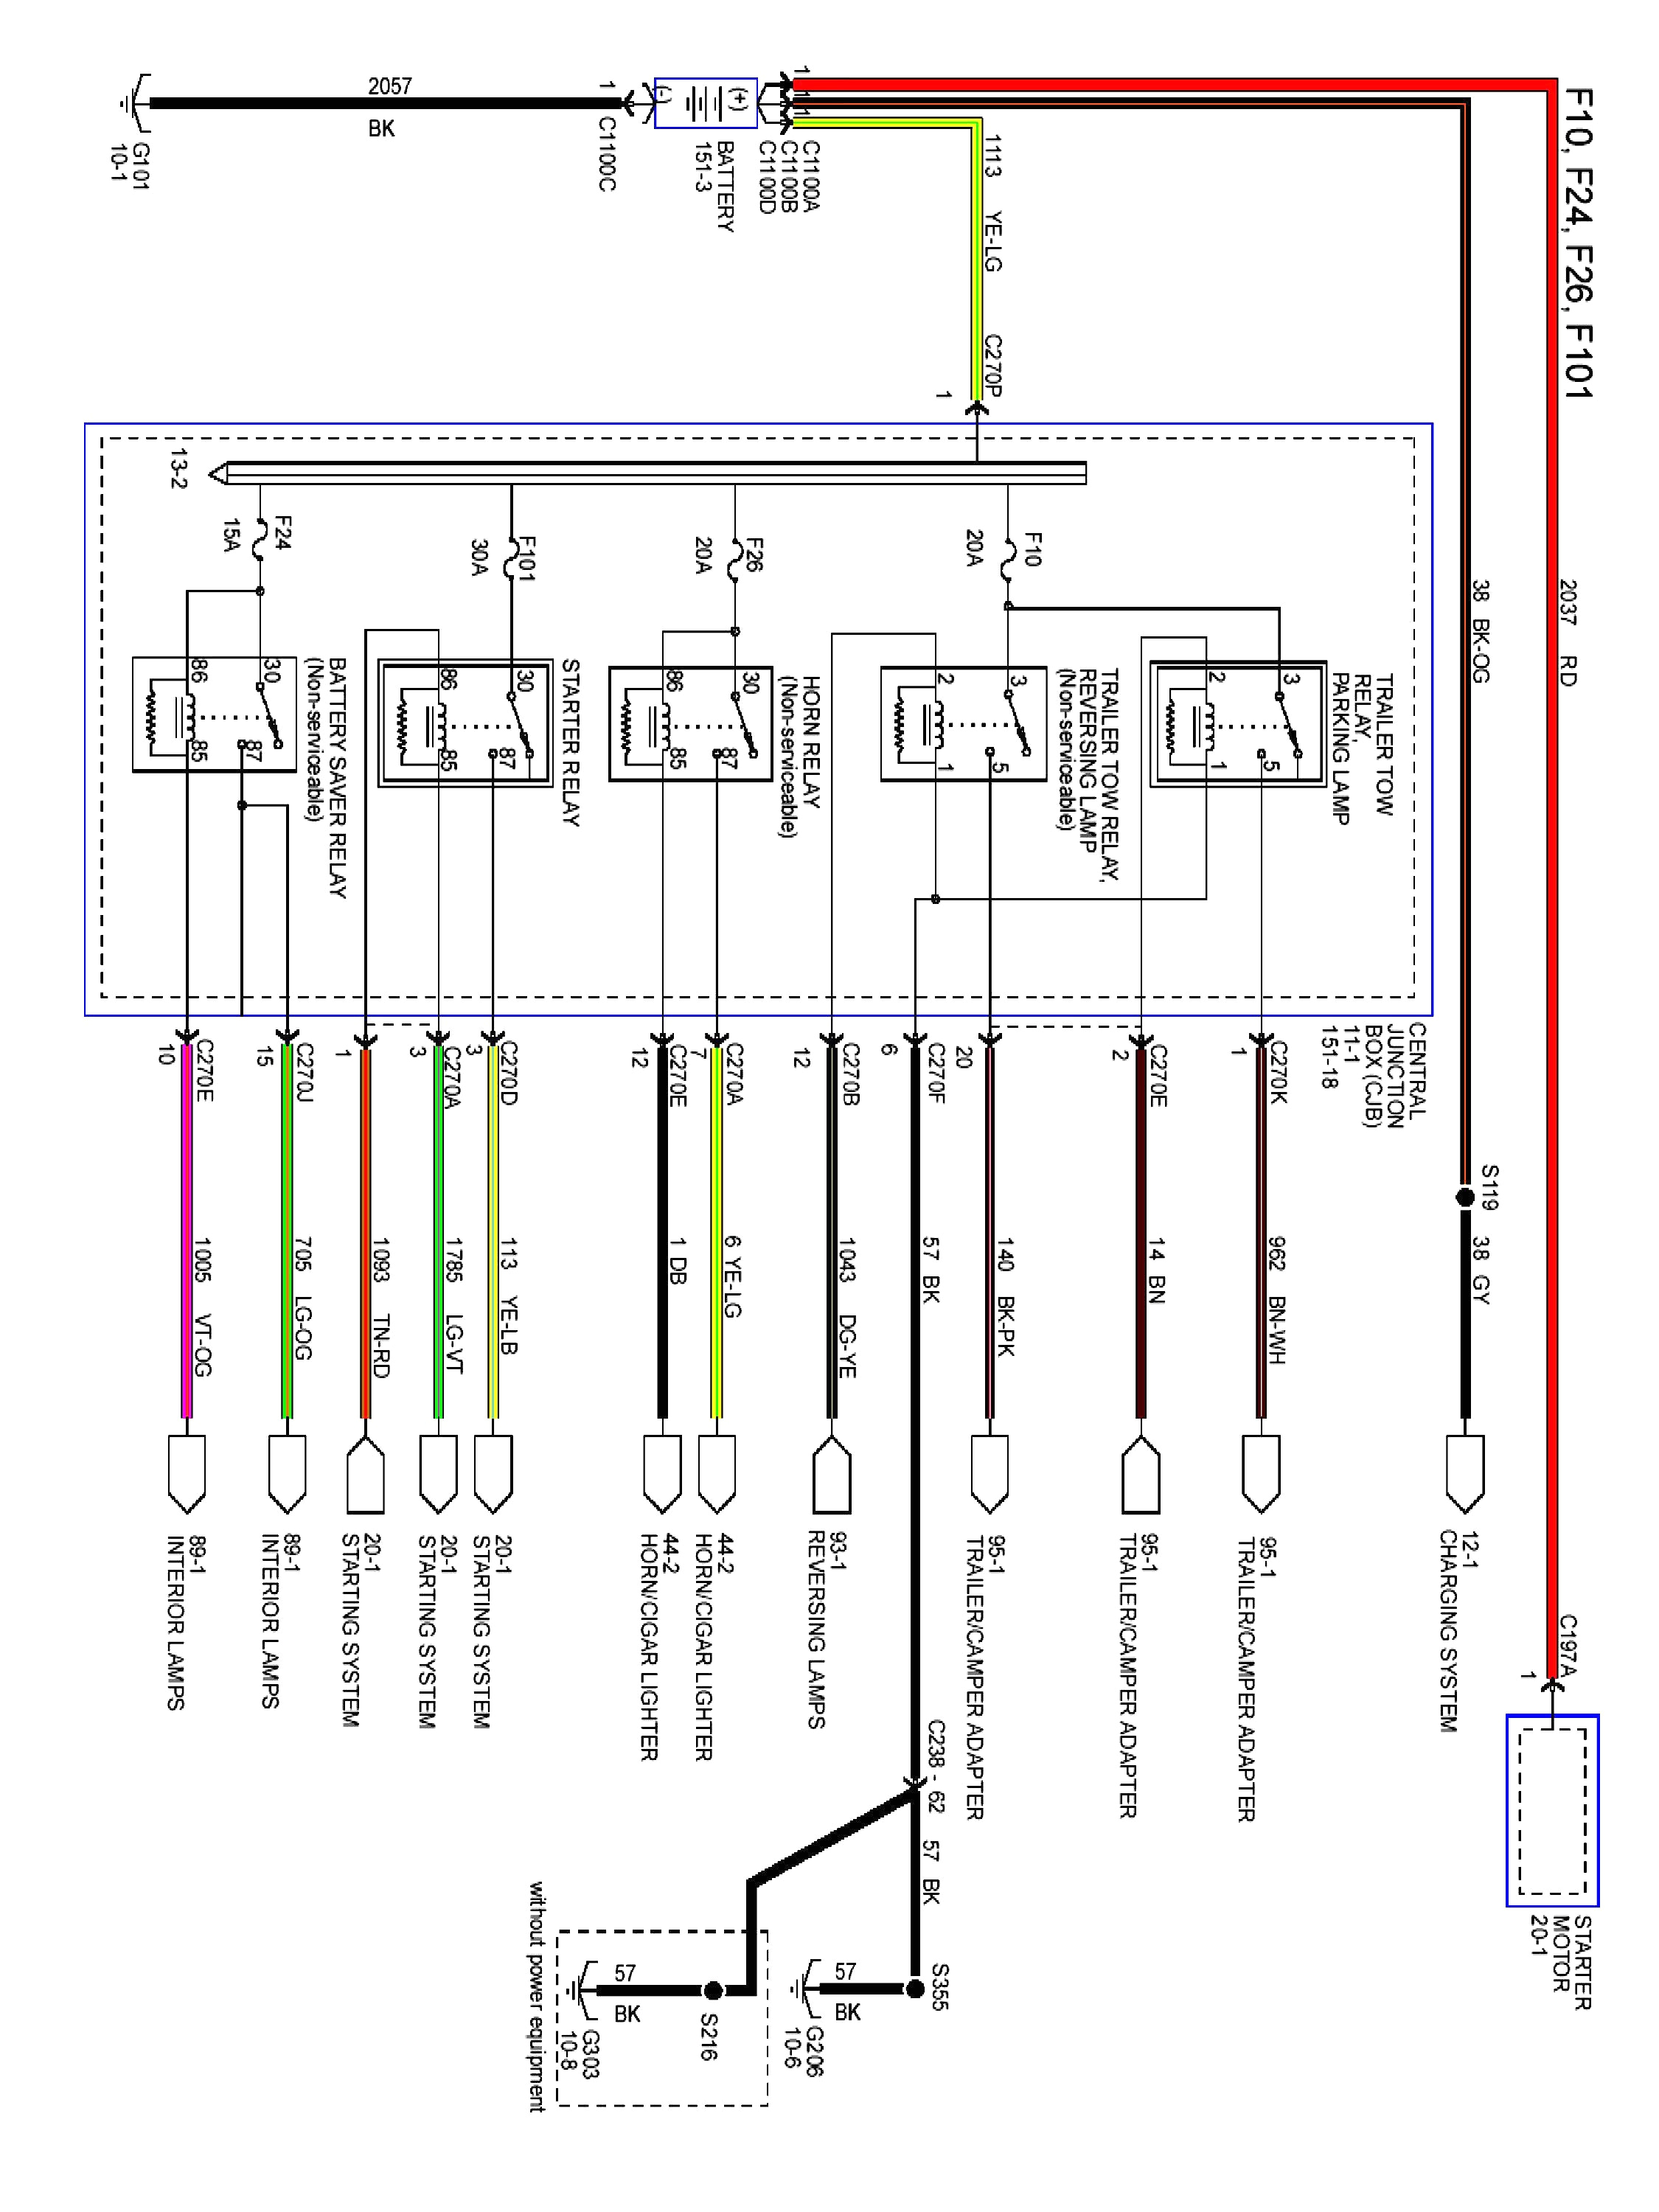 2008 ford Upfitter Switches Wiring Diagram 2015 ford F350 Wiring Diagram Wiring Diagram View